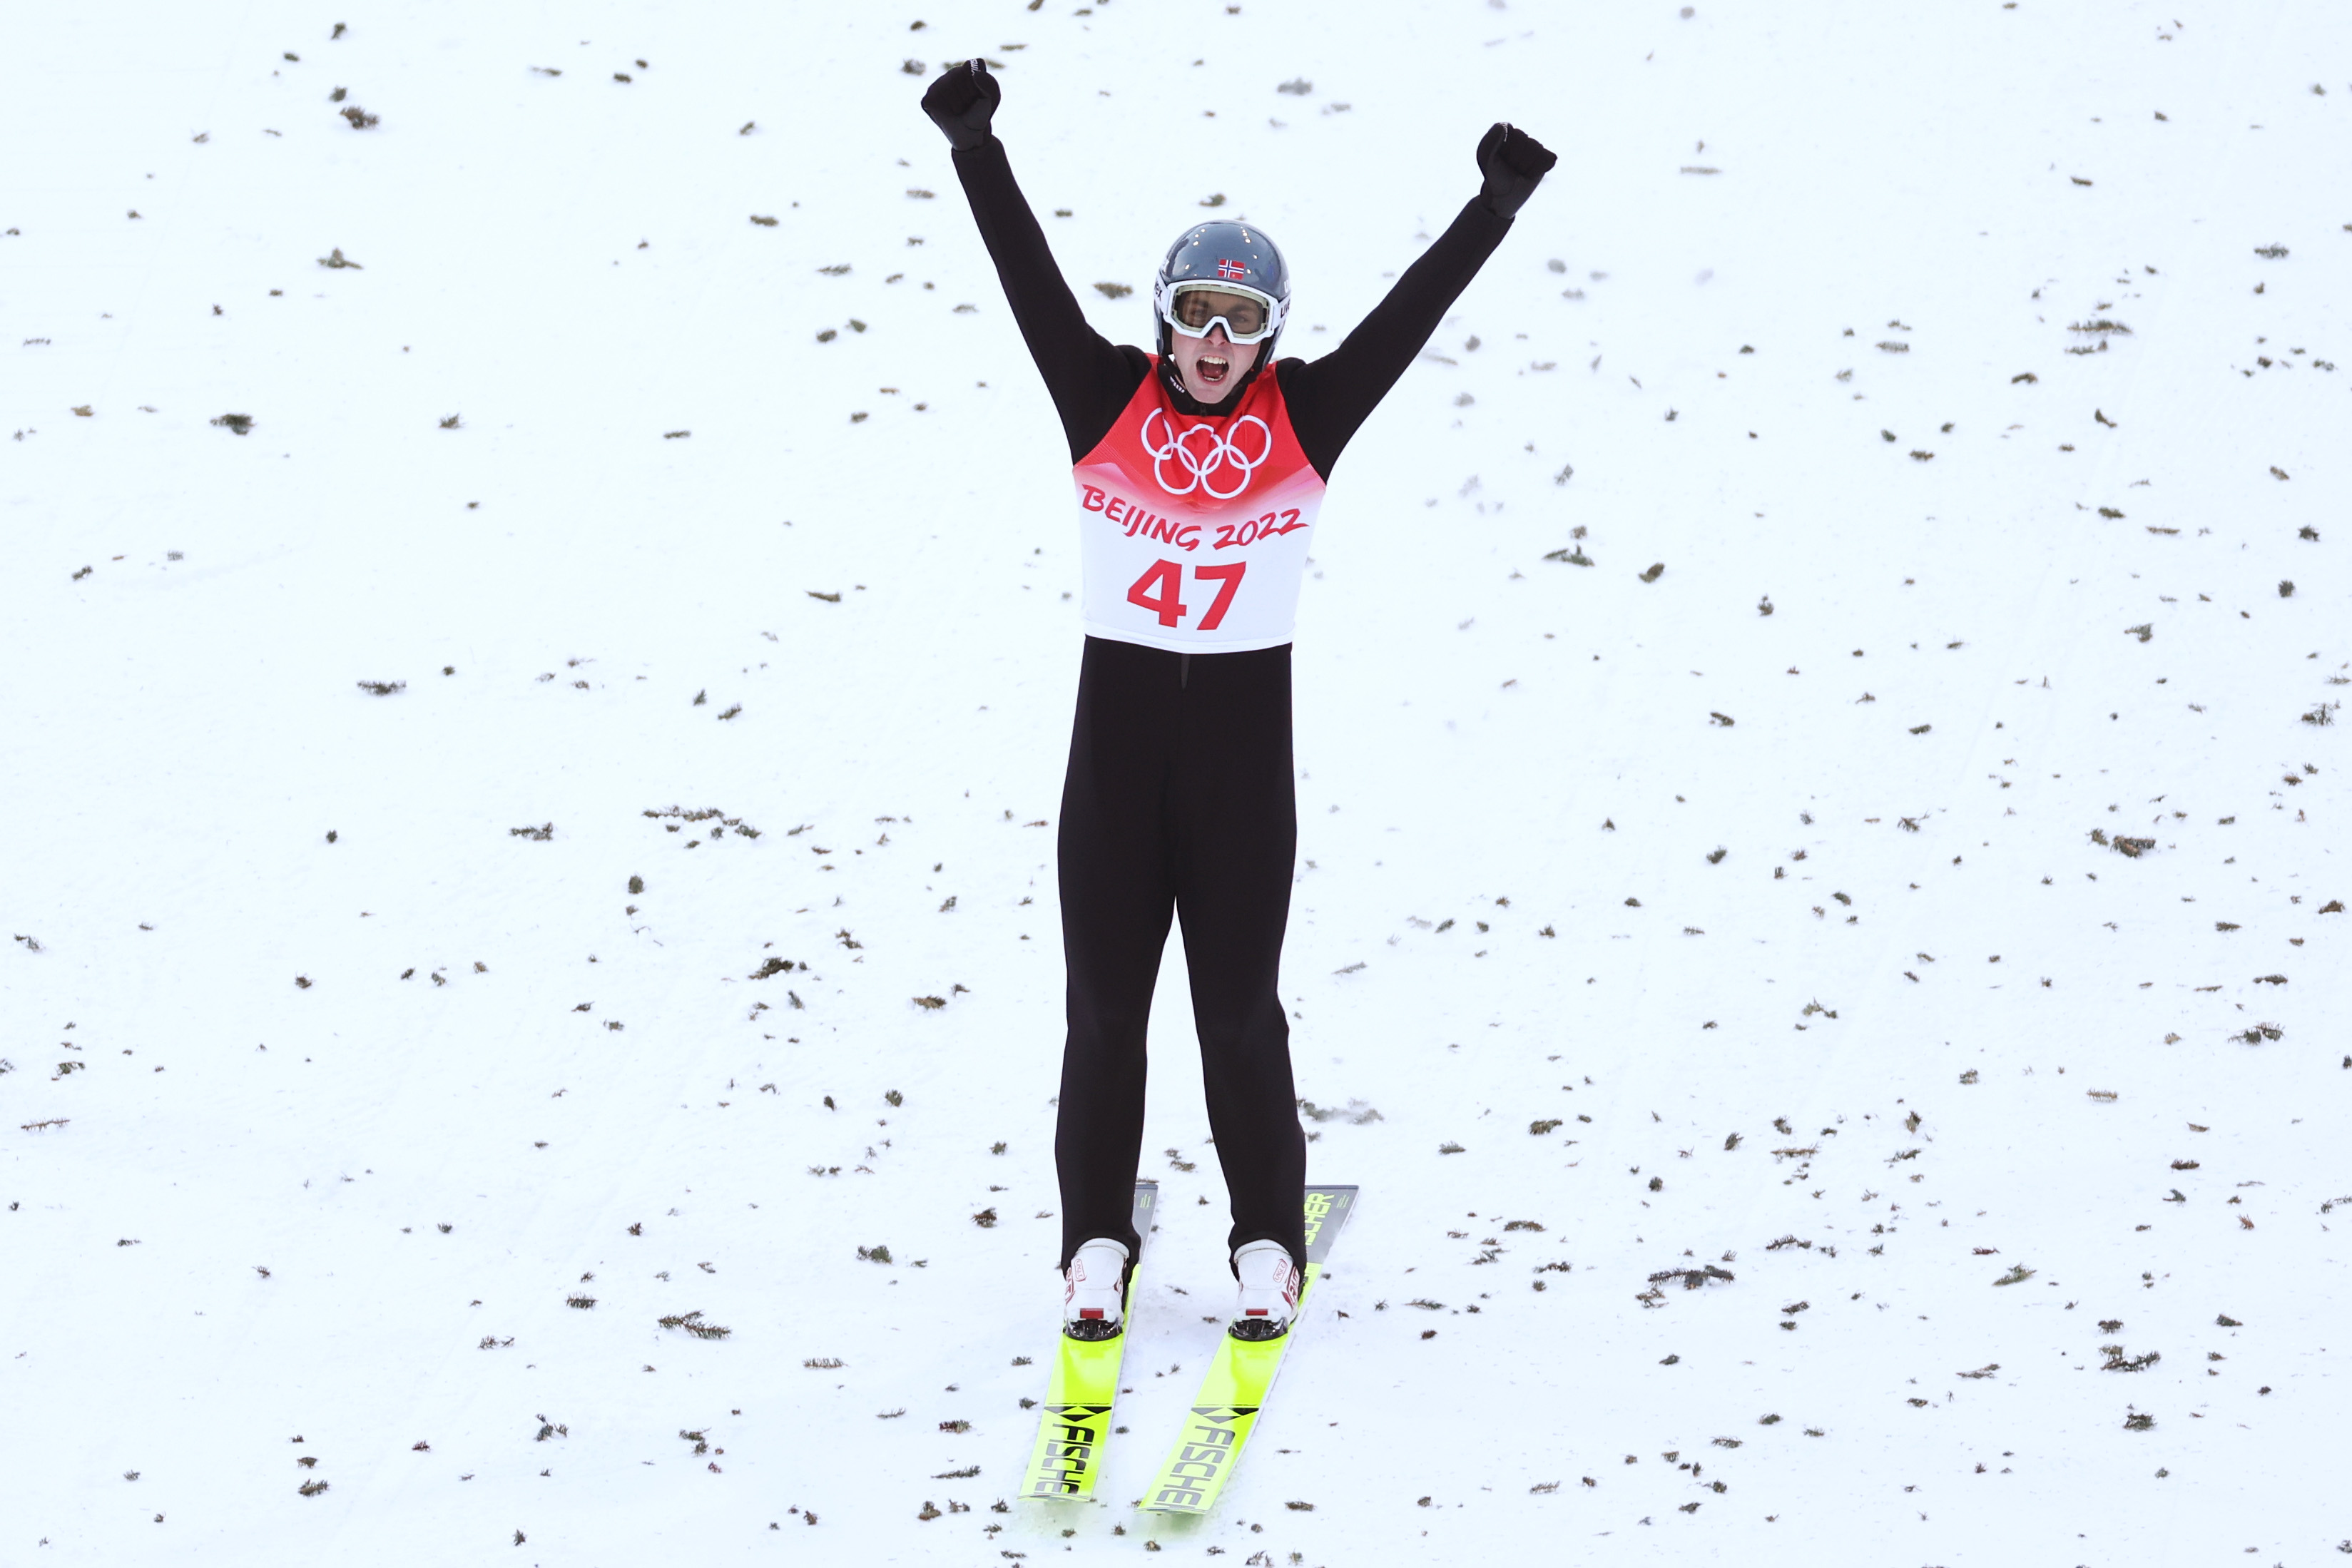 ZHANGJIAKOU, CHINA - FEBRUARY 15: Jarl Magnus Riiber of Team Norway celebrates competes during Individual Gundersen Large Hill/10km, Ski Jumping Competition Round on day 11 of 2022 Beijing Winter Olympics at The National Cross-Country Skiing Centre on February 15, 2022 in Zhangjiakou, China. (Photo by Lars Baron/Getty Images)